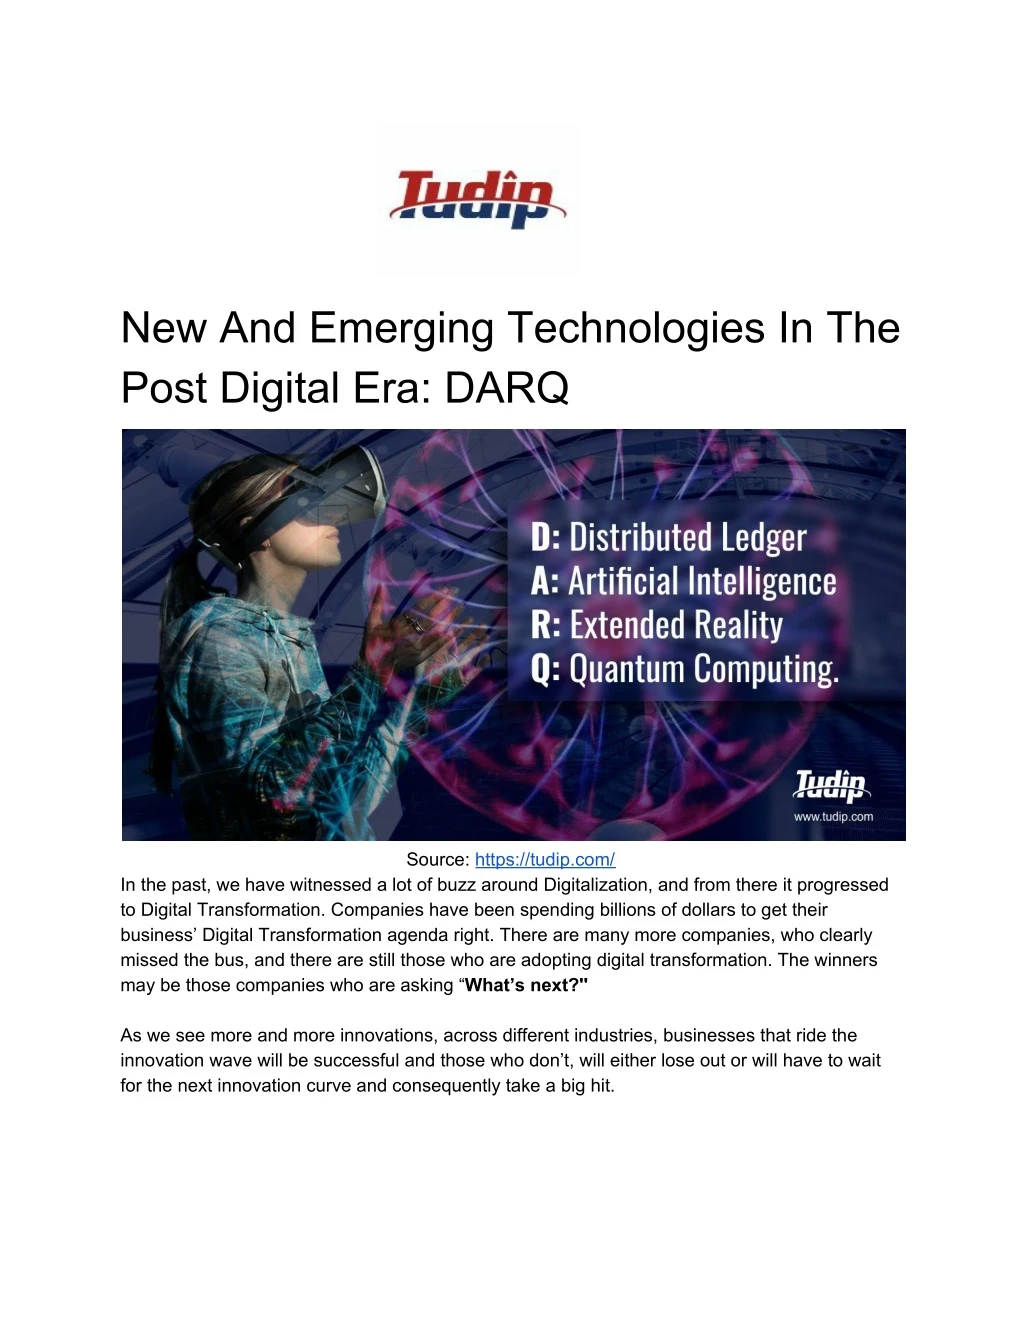 new and emerging technologies in the post digital